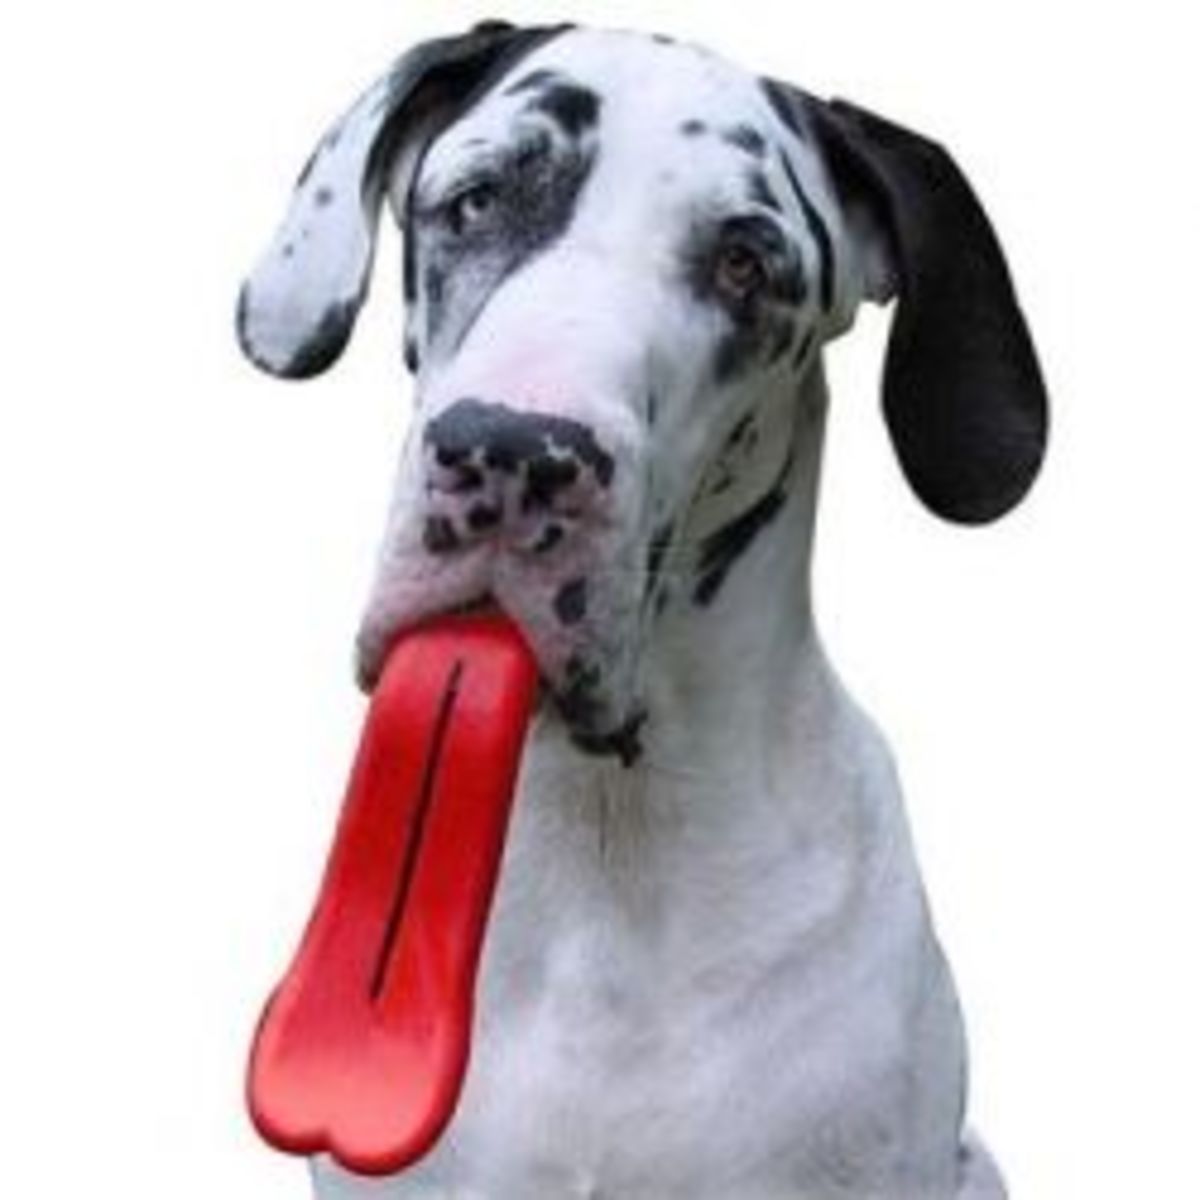 The 21 Coolest Dog Toys on the Planet! - PetHelpful